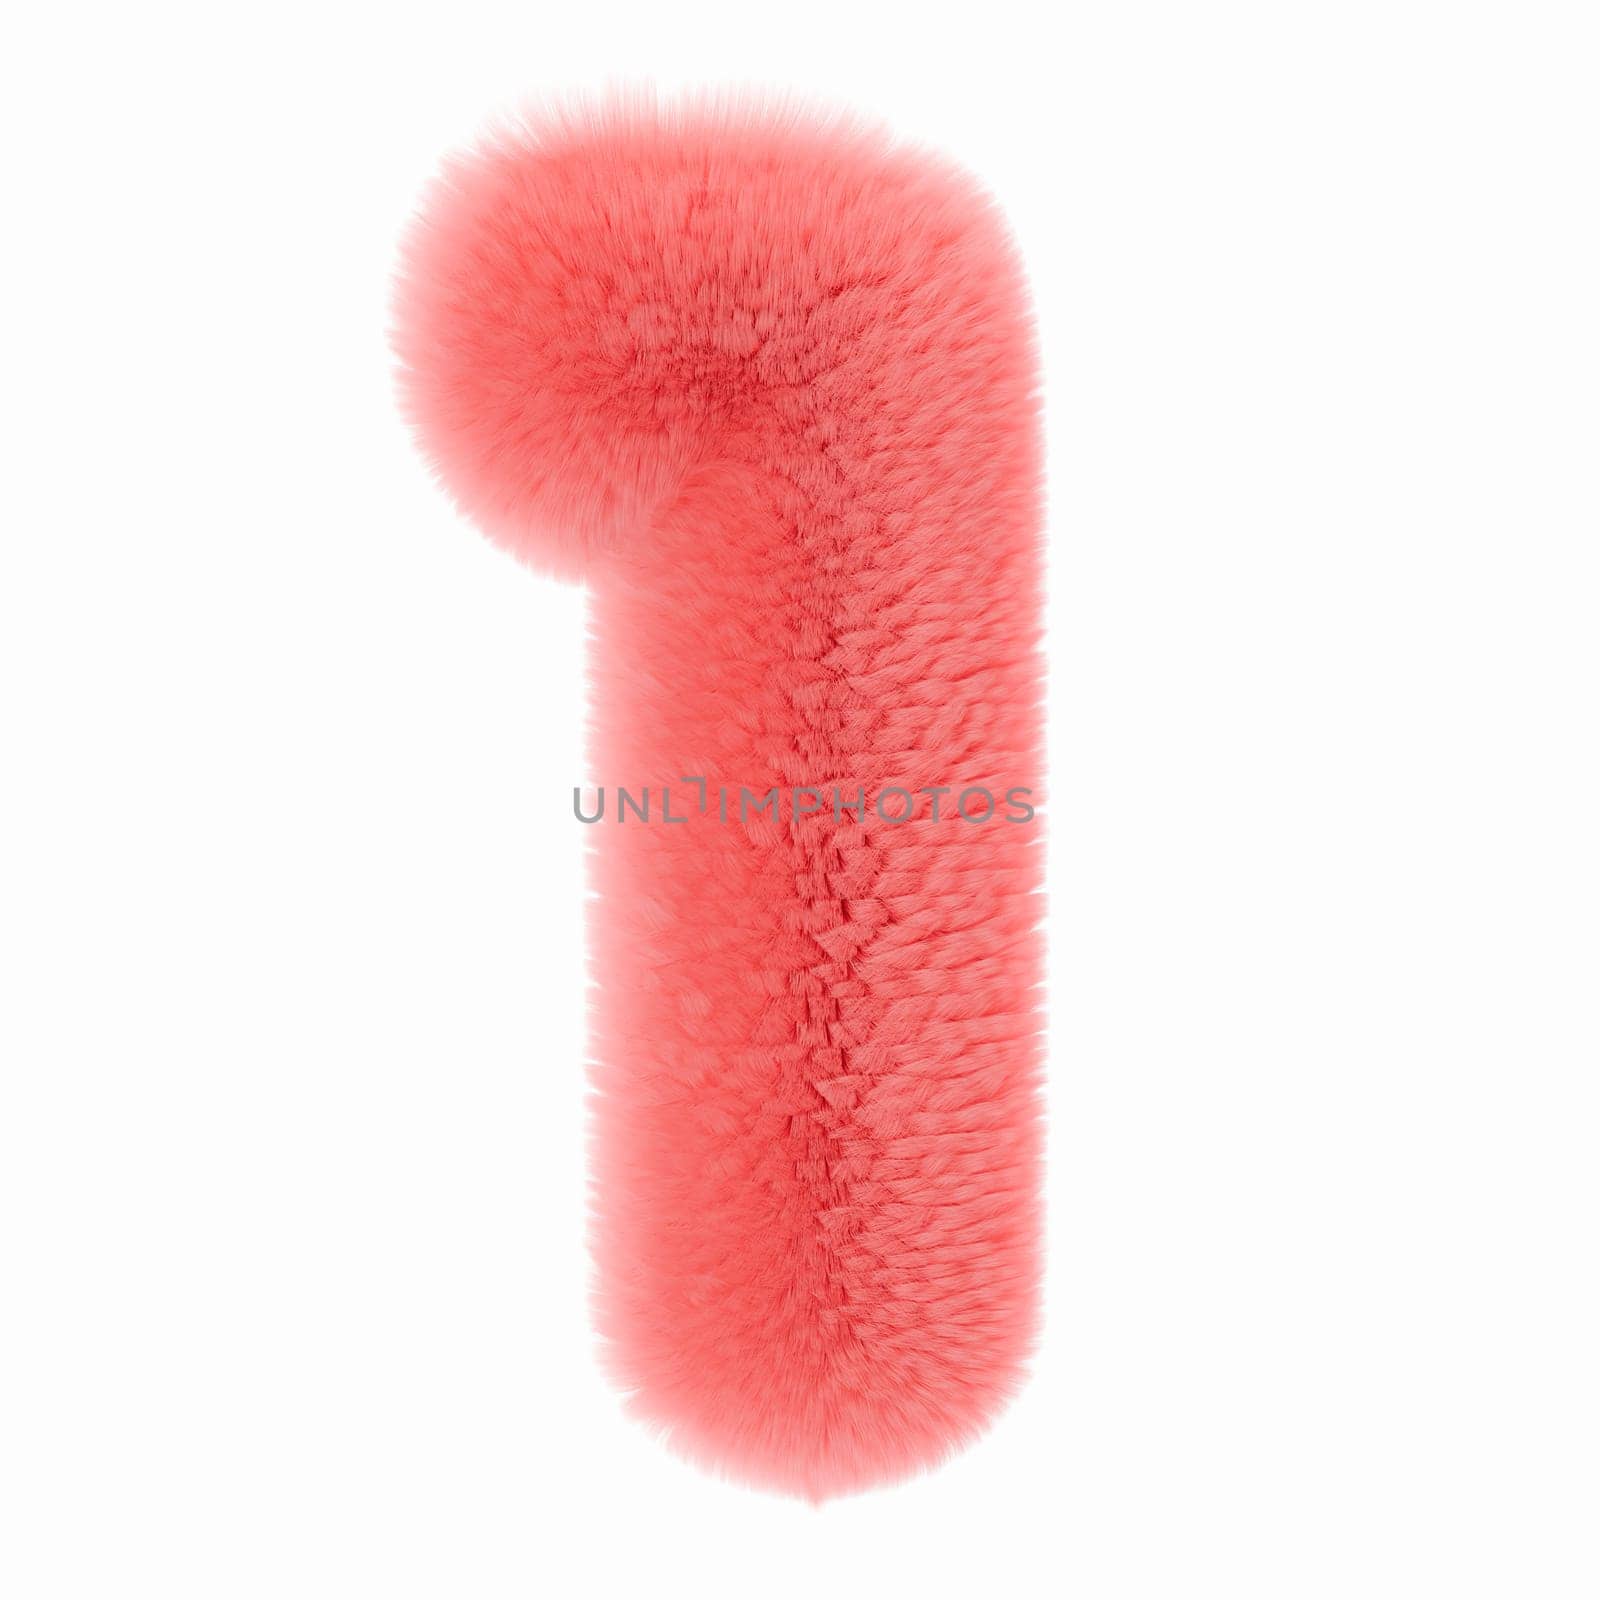 Pink and fluffy 3D number one, isolated on white background. Furry, soft and hairy symbol 1. Trendy, cute design element. Cut out object. 3D rendering